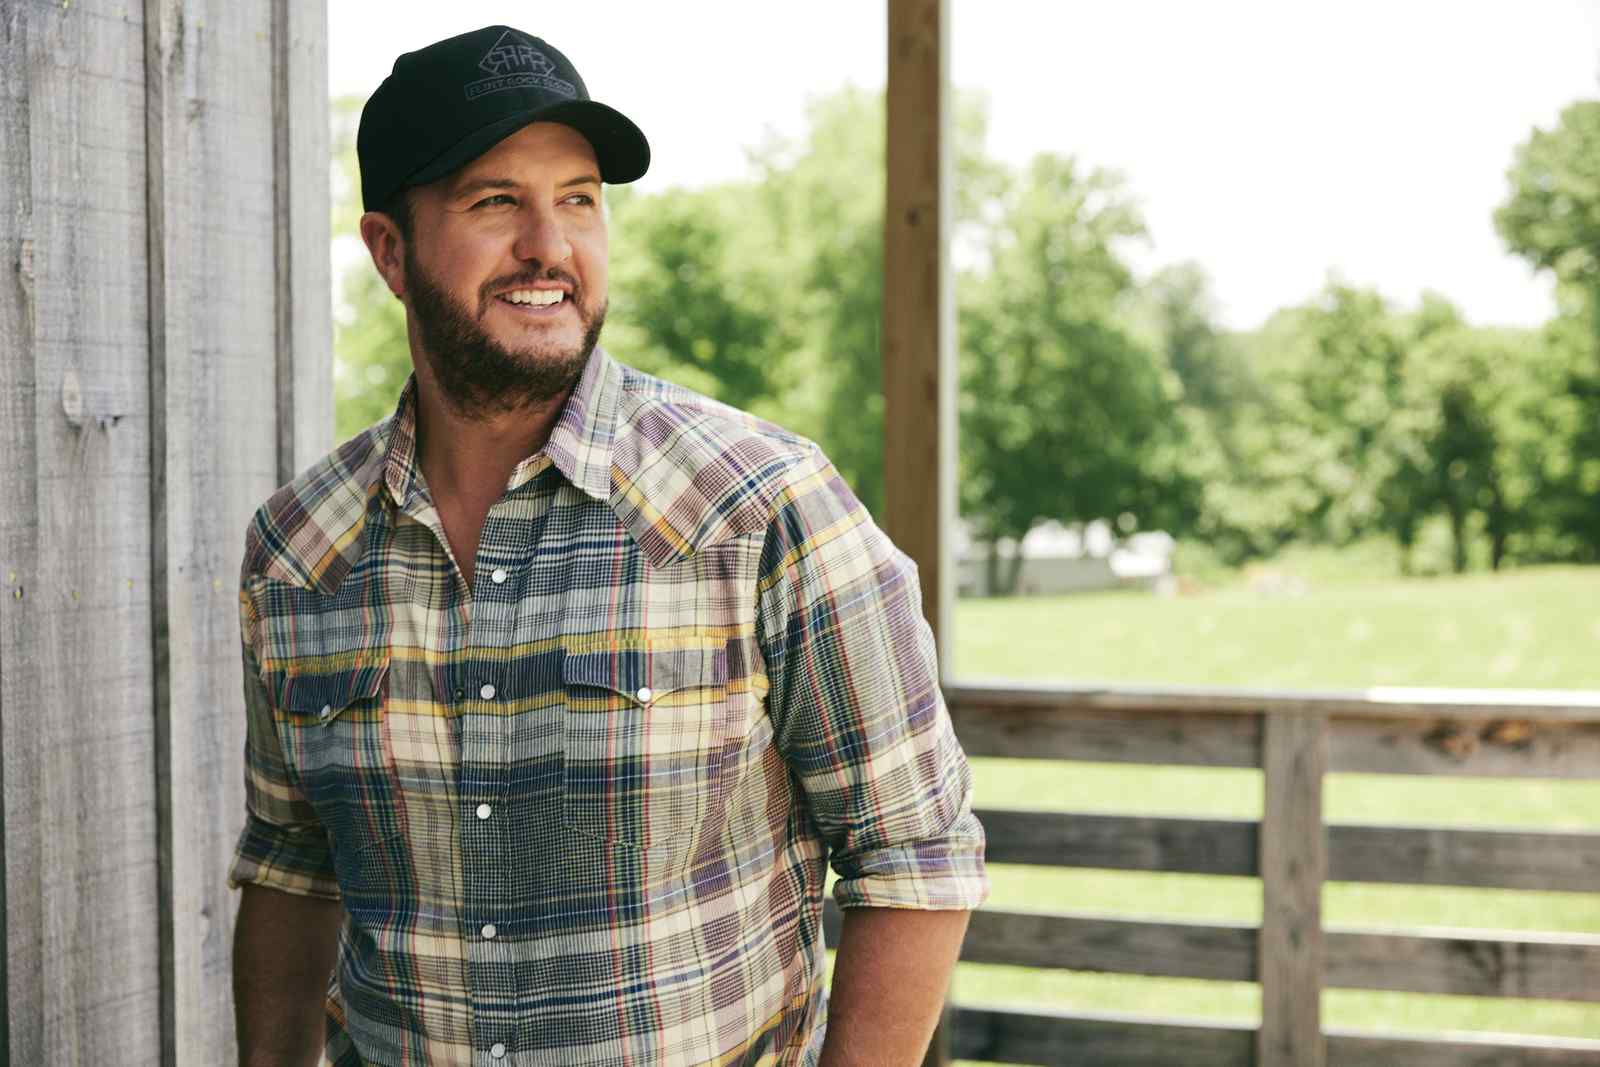 Luke Bryan Premieres Brand New Single at Country Radio Today! “Country On”